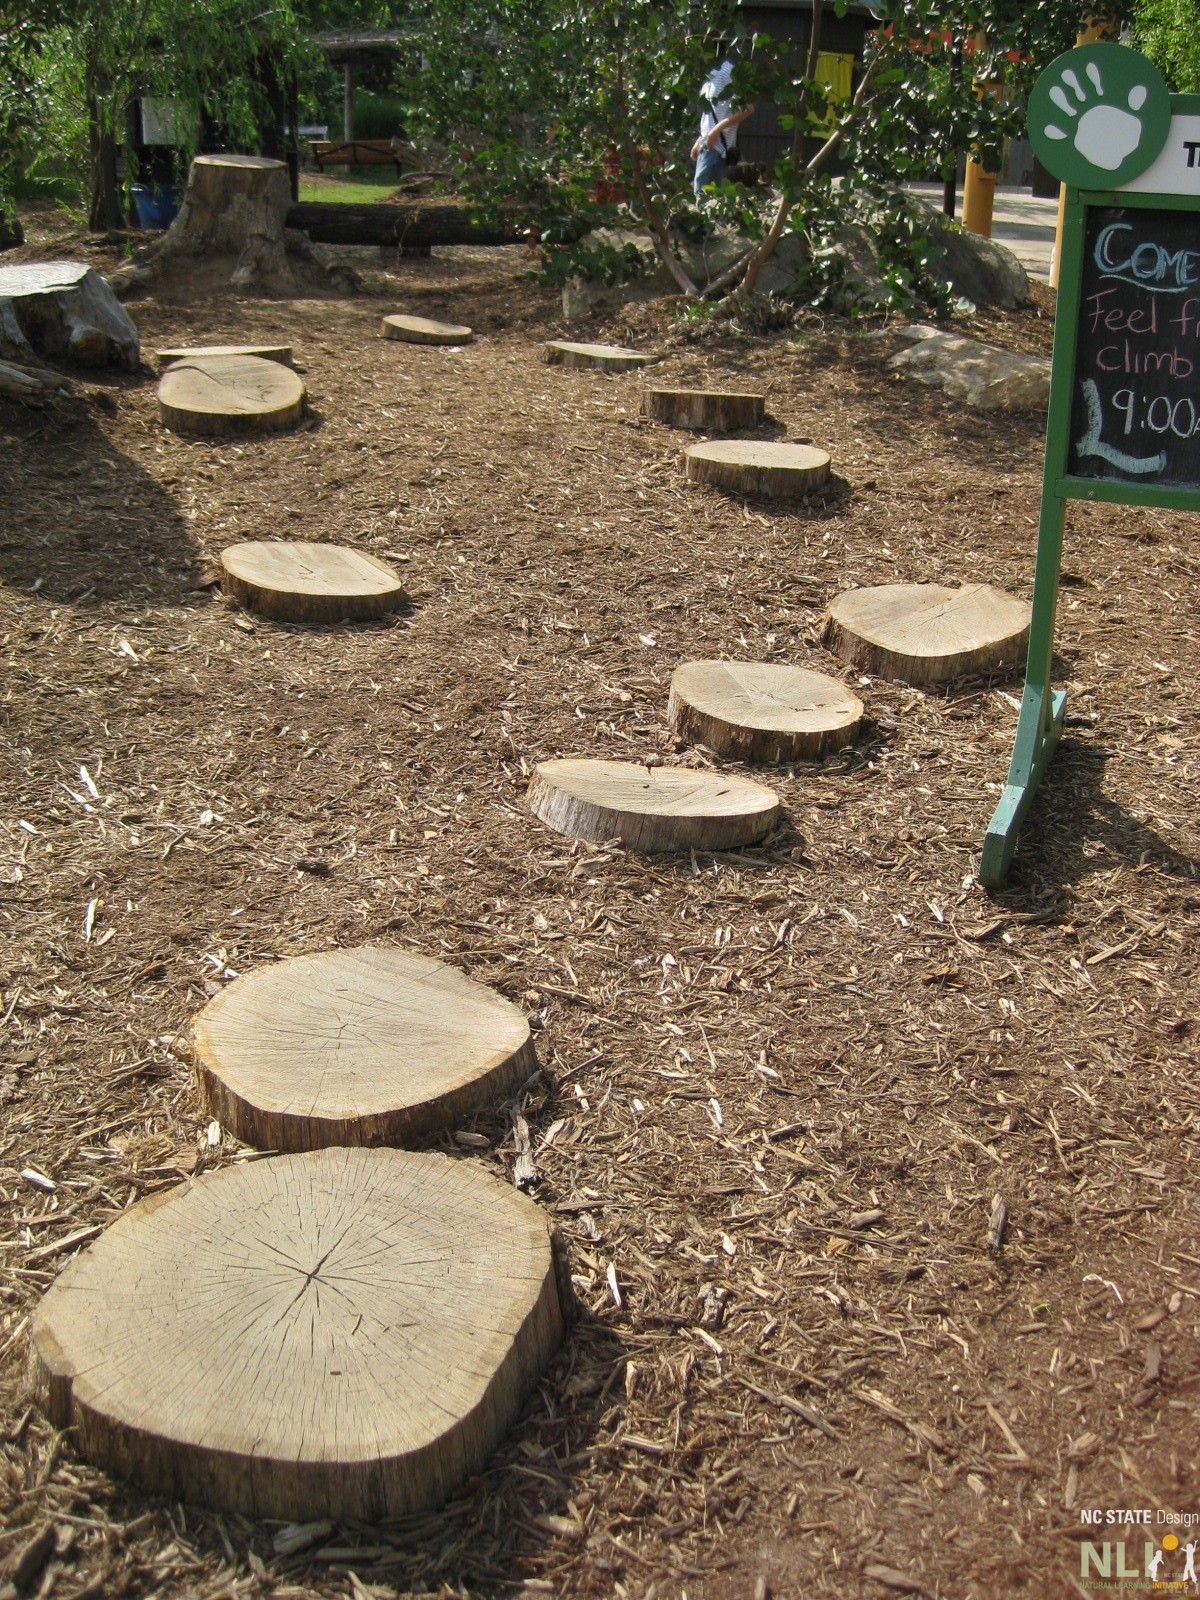 tree cookies integrated into the play area